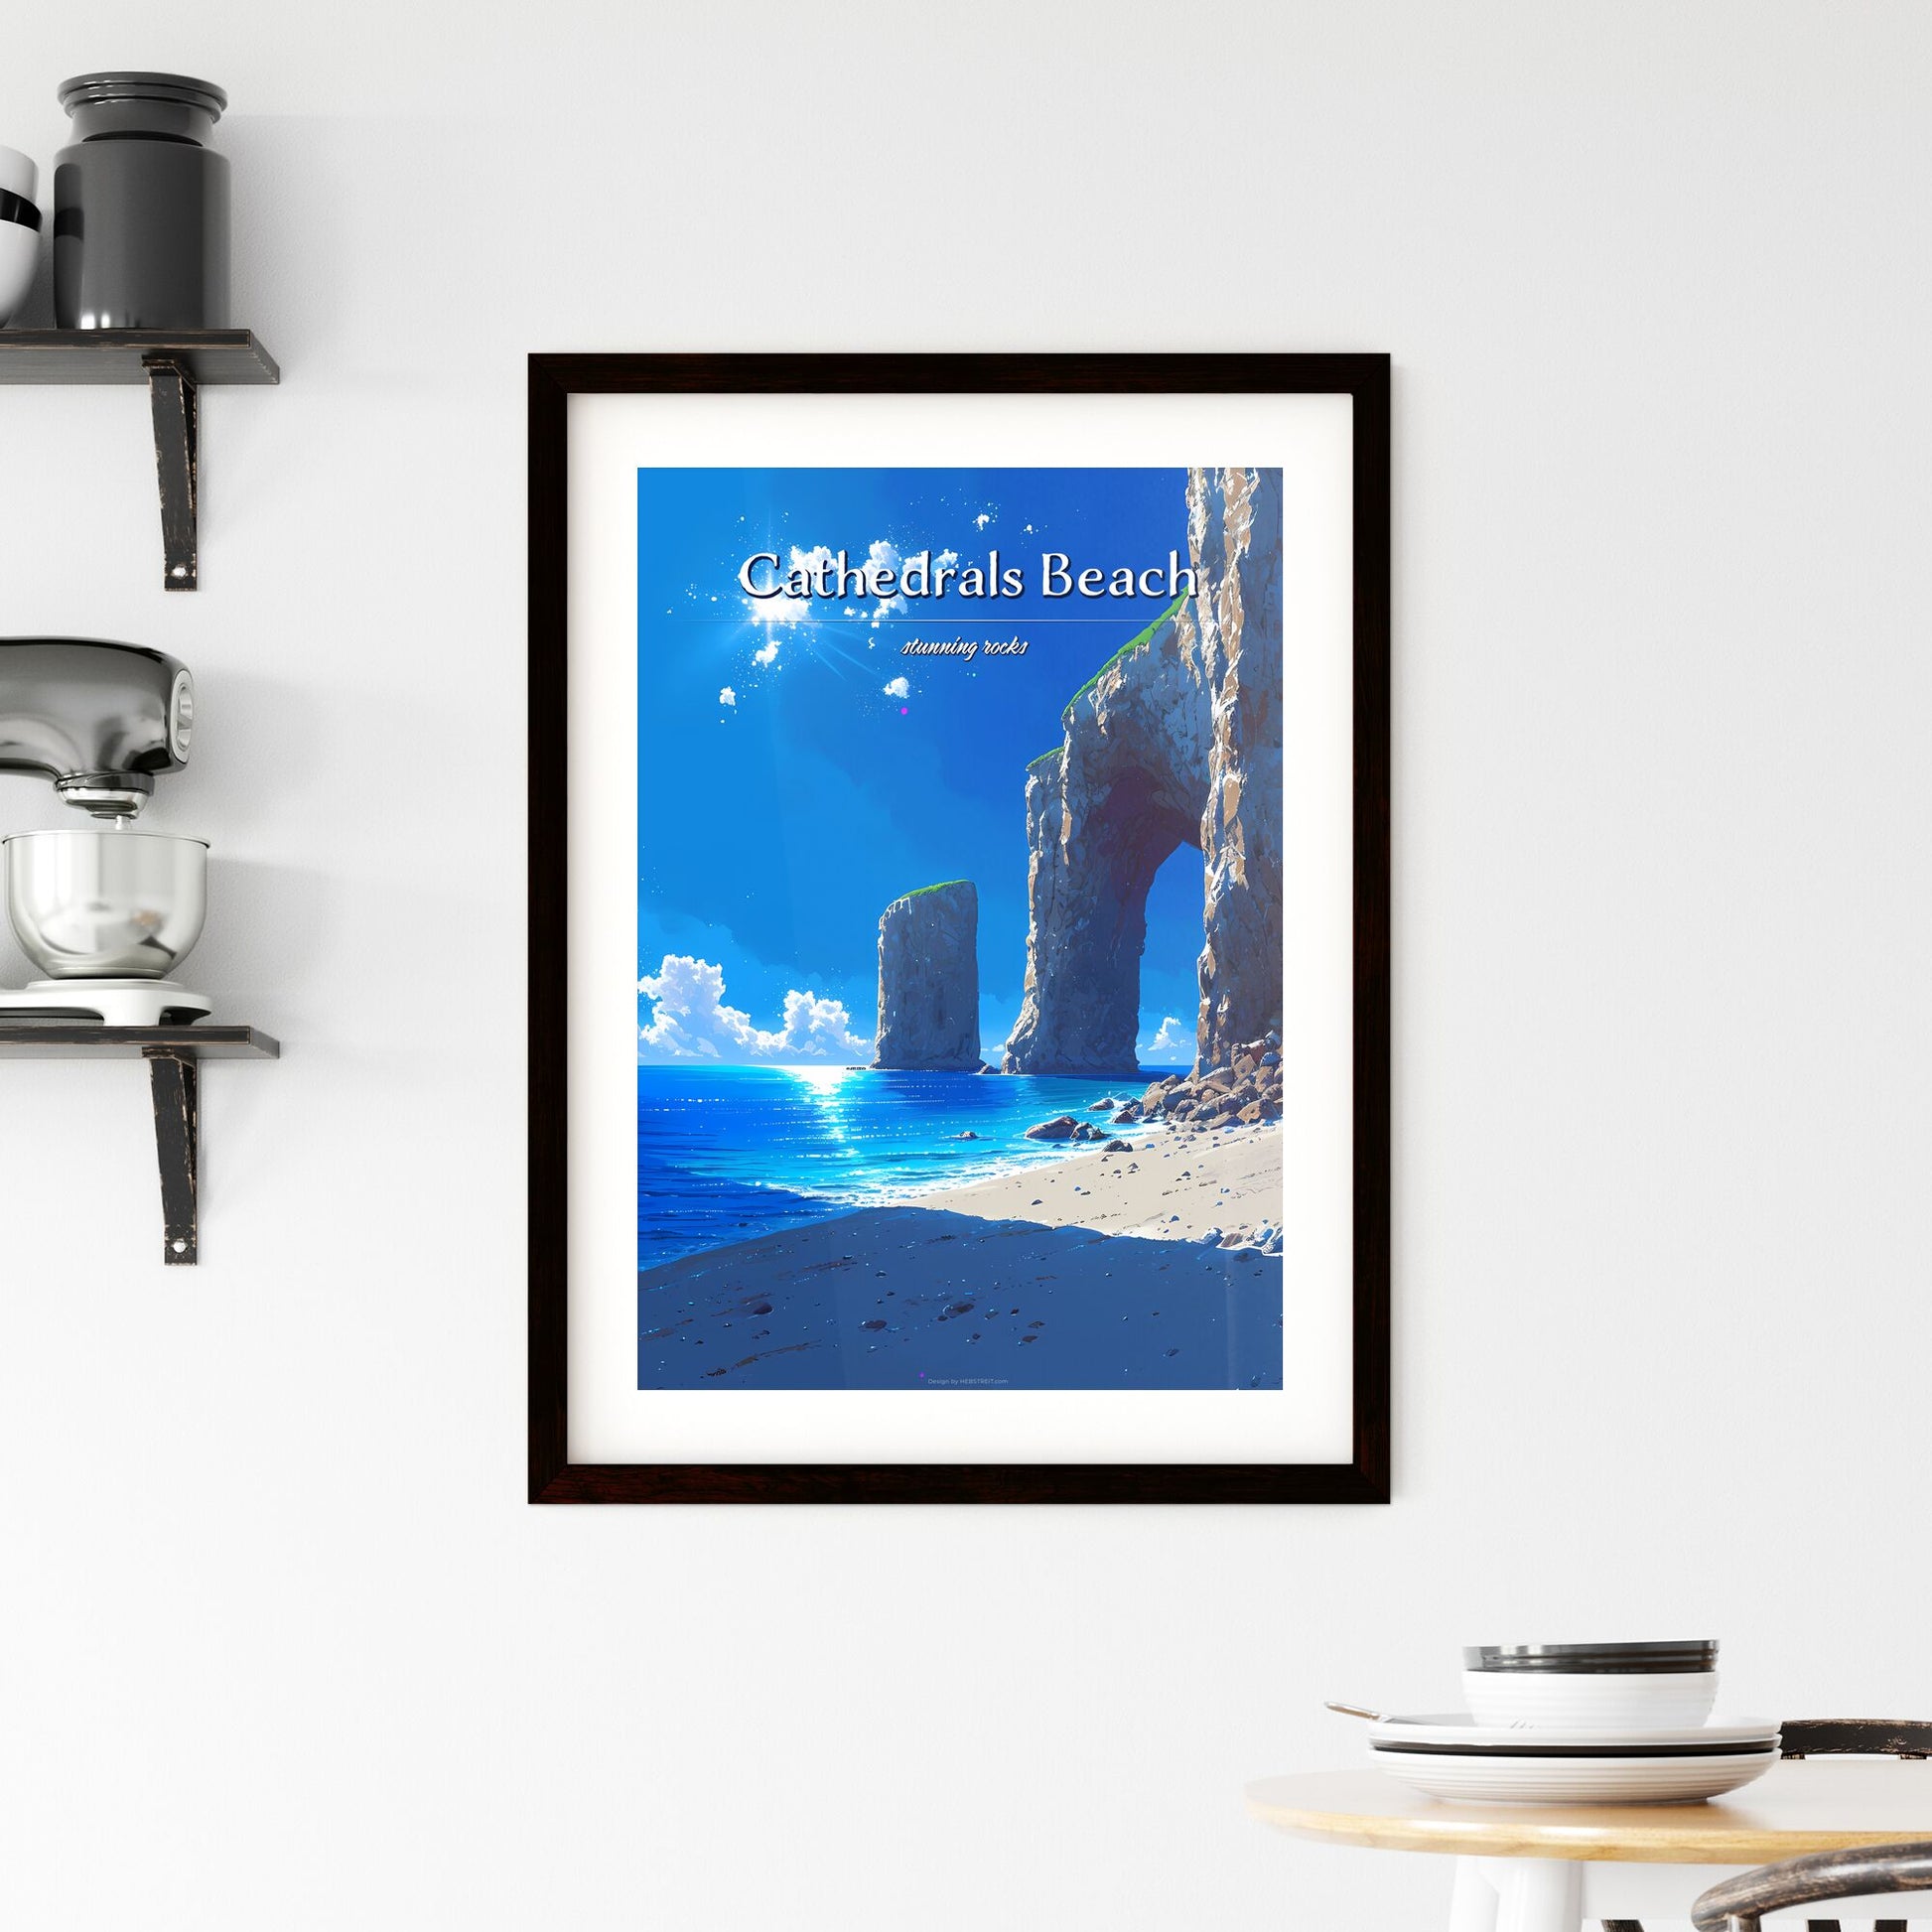 Cathedrals Beach - Art print of a beach with rocks and a large arch Default Title